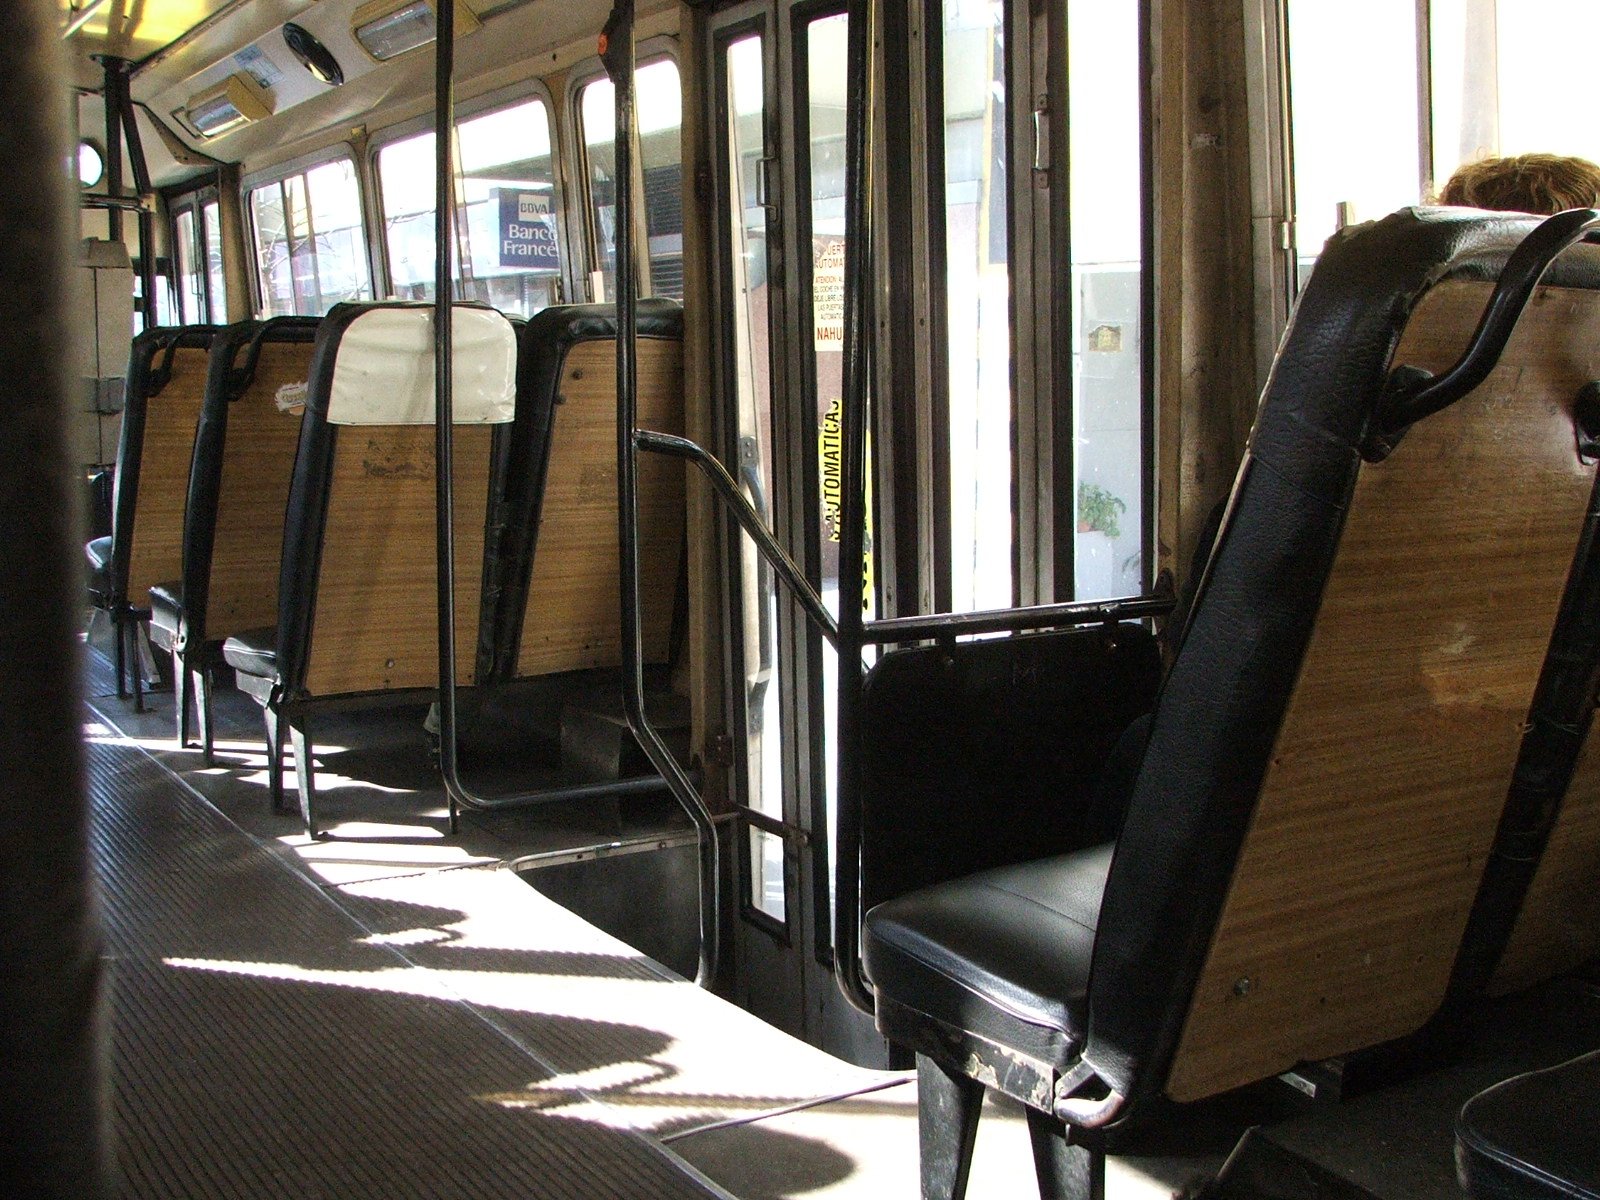 empty seats are set up on a crowded bus